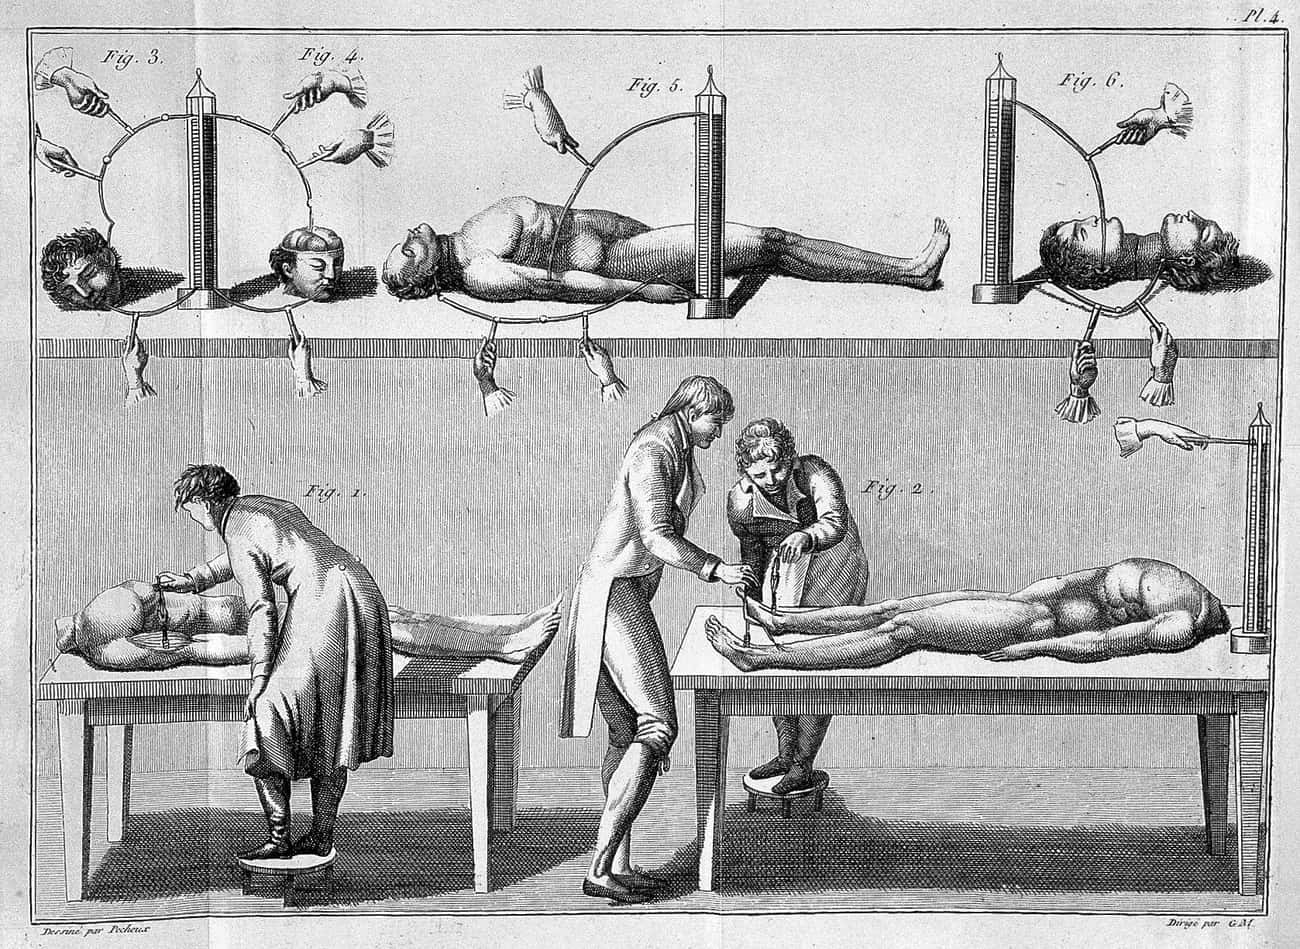 The &#34;Murder Act&#34; Provided Human Specimens To Scientists